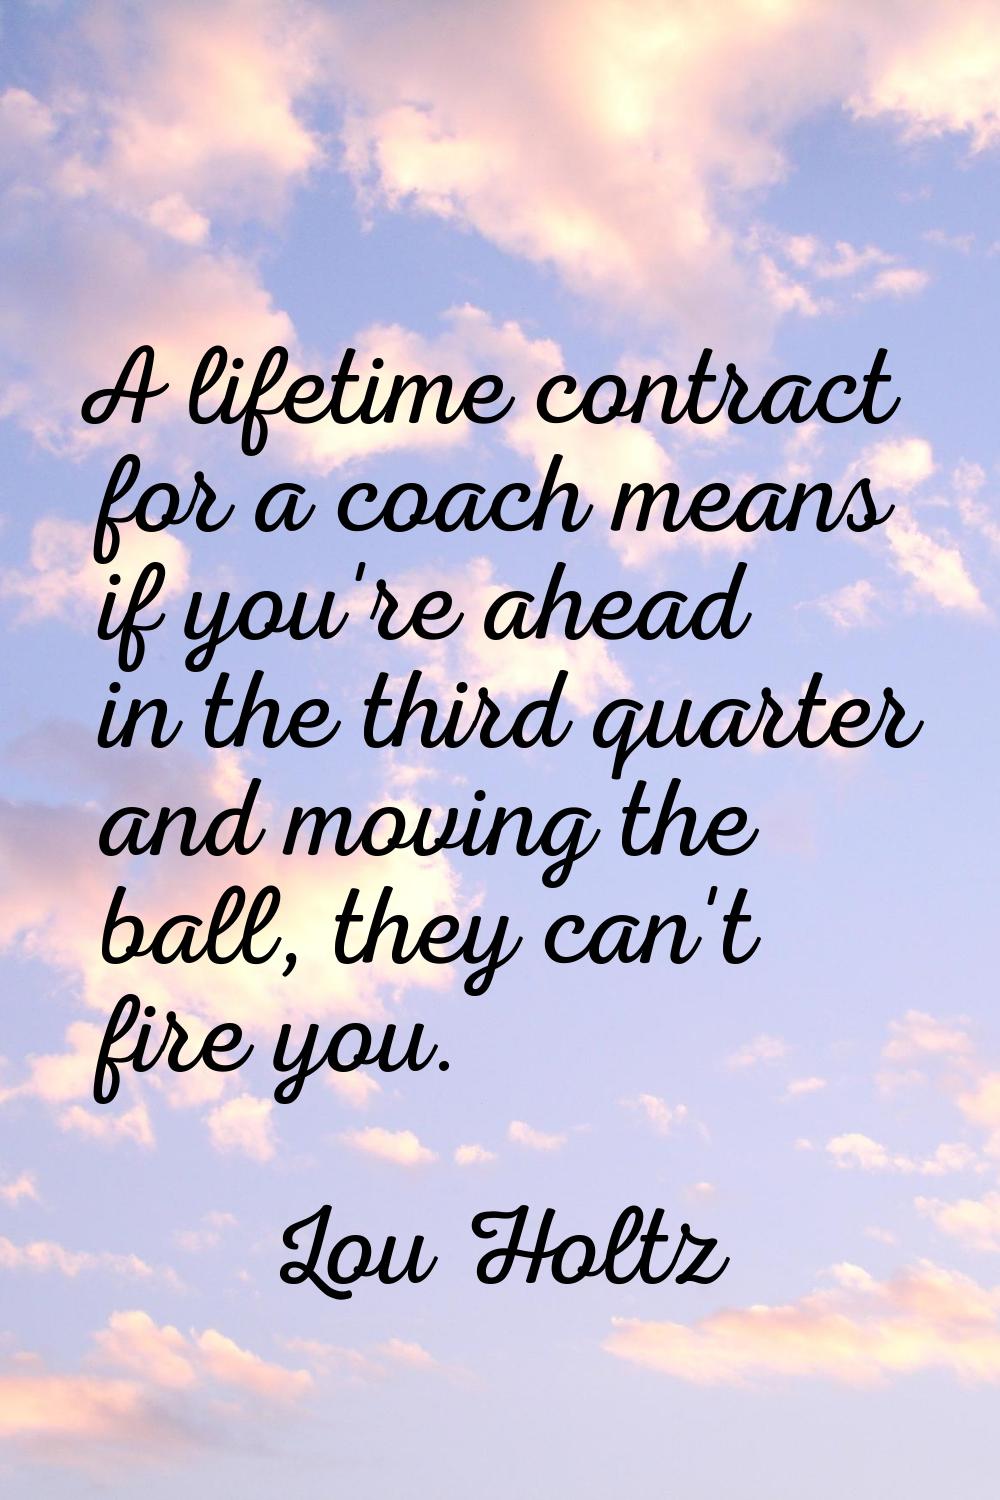 A lifetime contract for a coach means if you're ahead in the third quarter and moving the ball, the